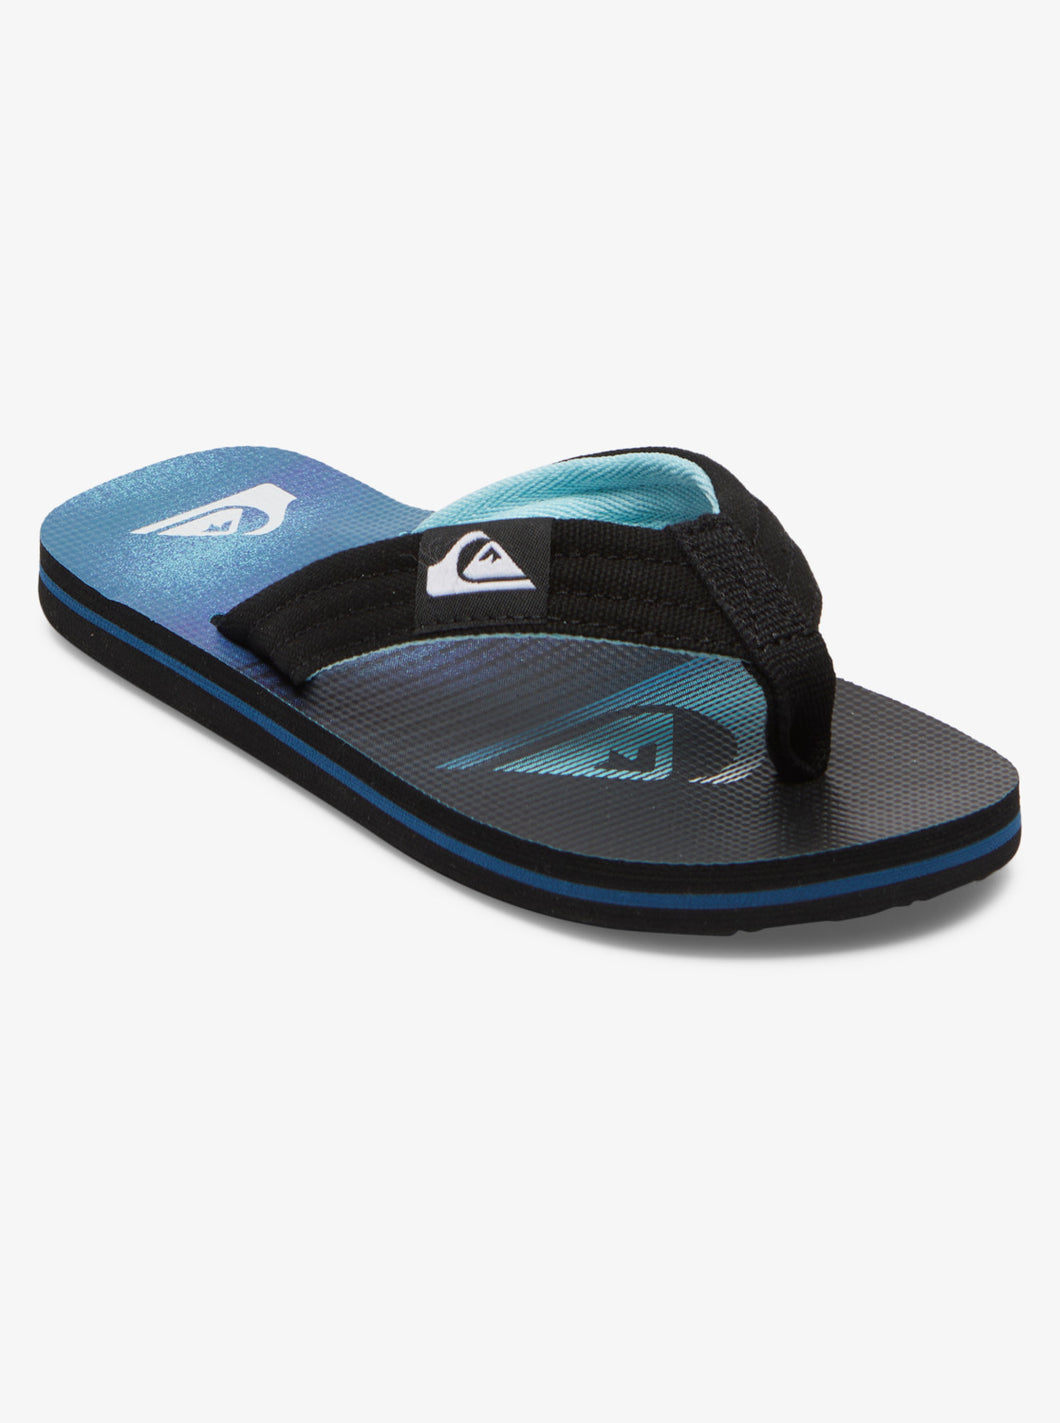 Quiksilver Molokai Layback 11 Youth Sandals